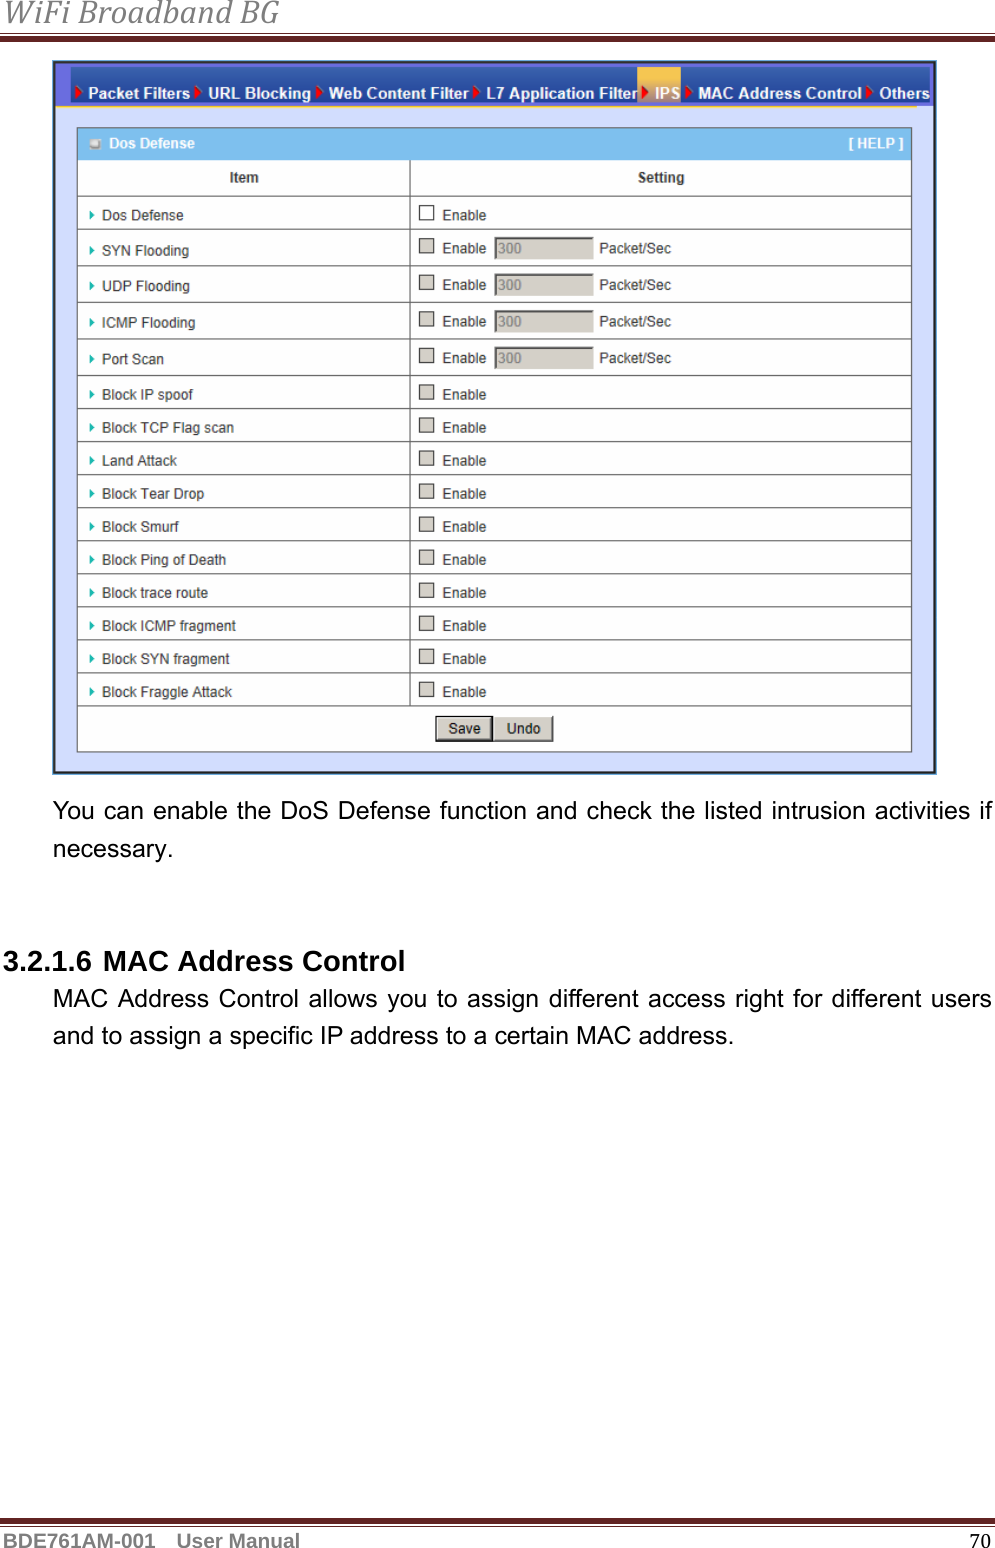 WiFiBroadbandBGBDE761AM-001  User Manual   70 You can enable the DoS Defense function and check the listed intrusion activities if necessary.   3.2.1.6 MAC Address Control MAC Address Control allows you to assign different access right for different users and to assign a specific IP address to a certain MAC address. 